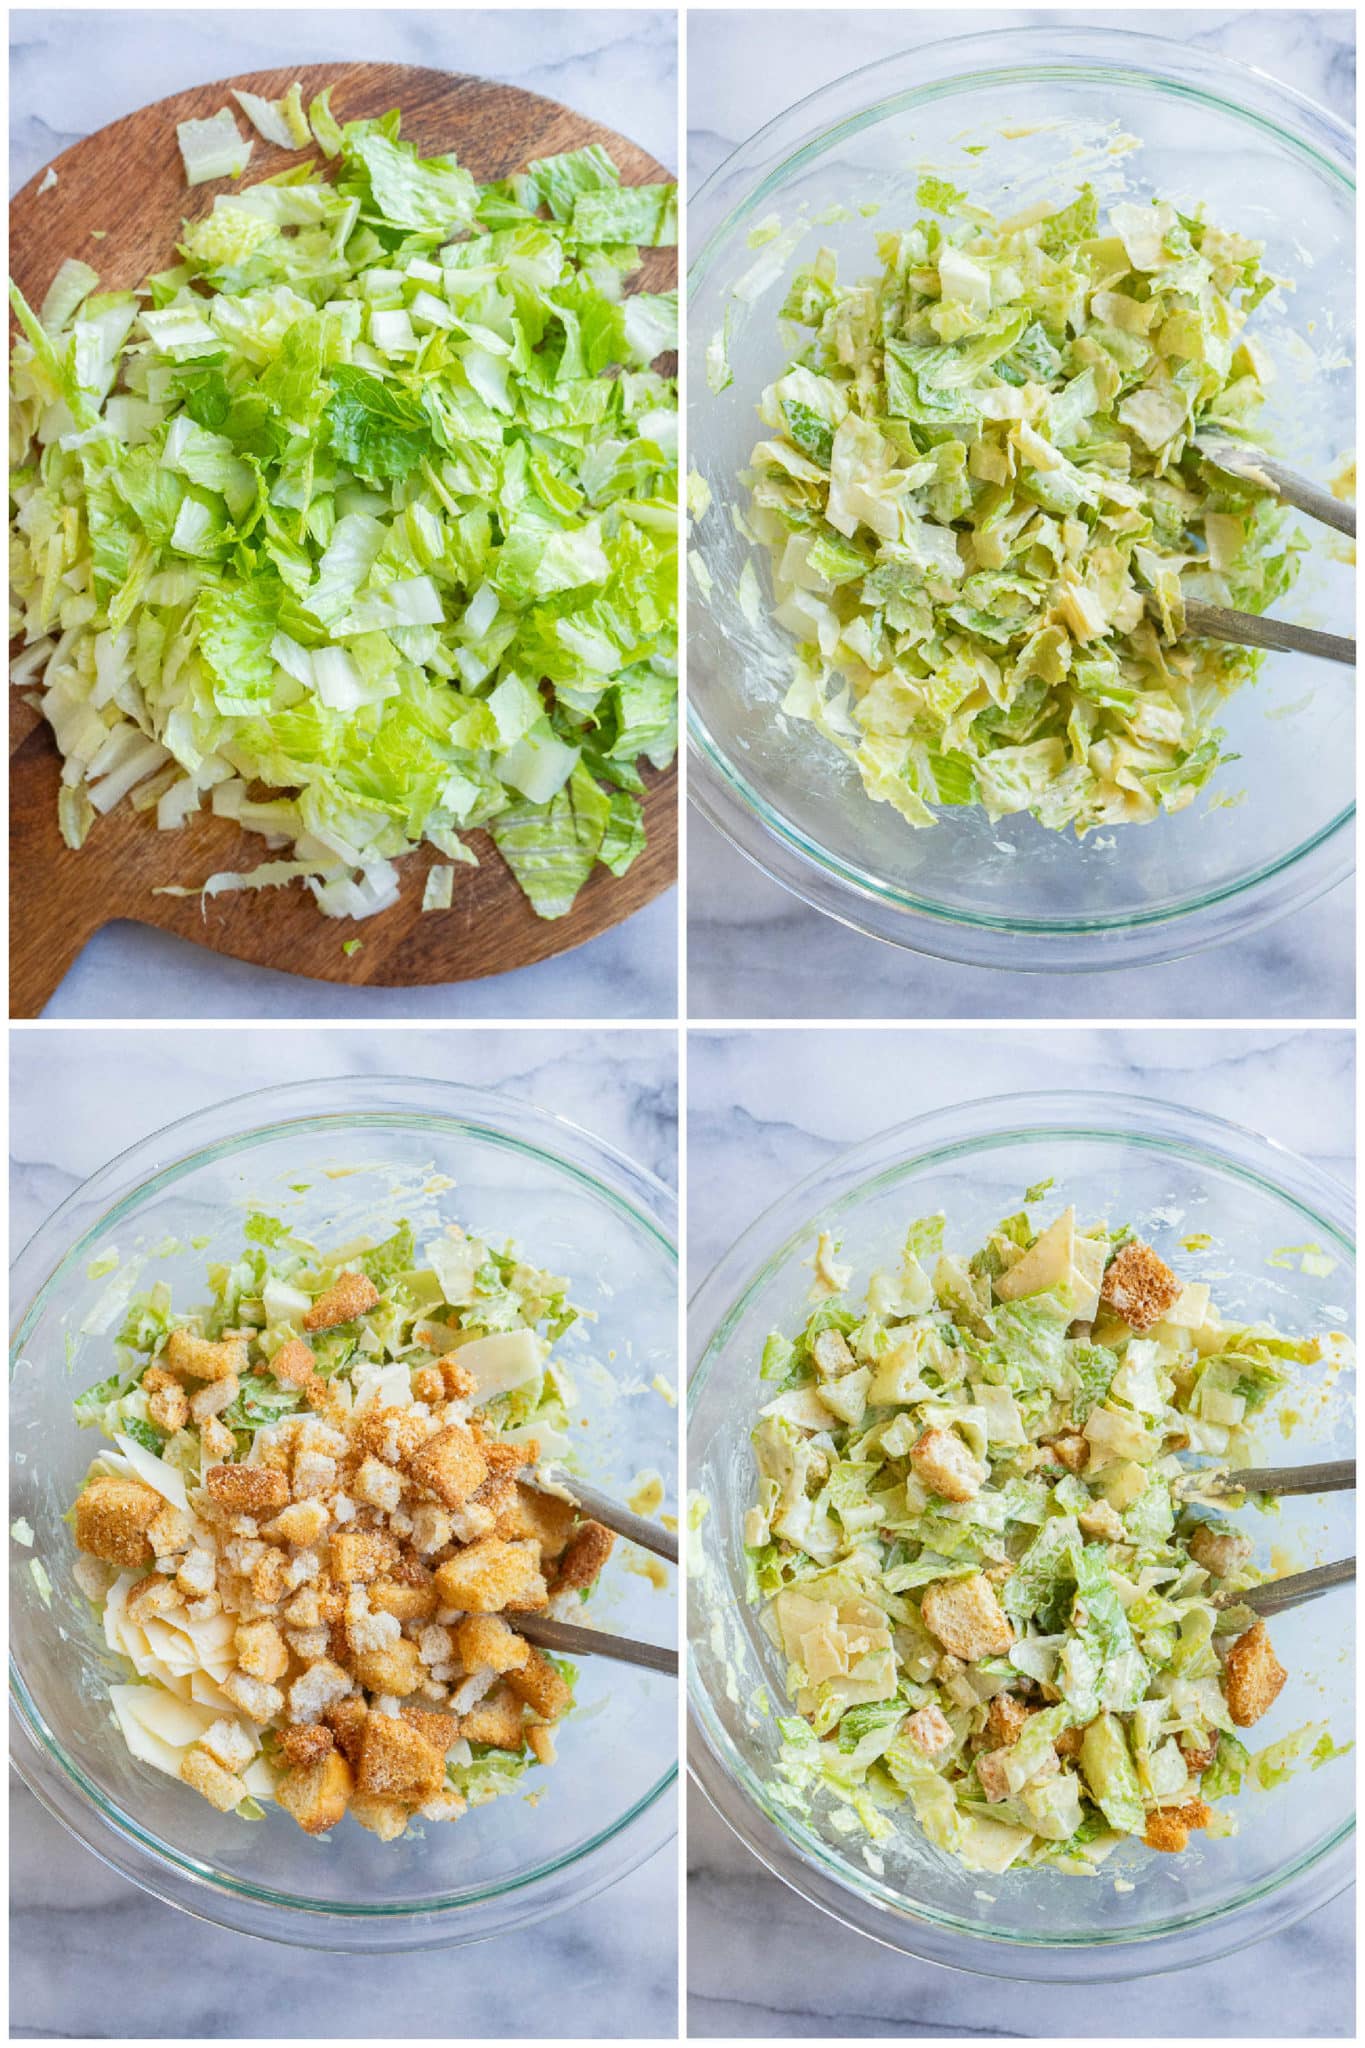 romaine lettuce chopped up and added to a bowl with caesar dressing, parmesan cheese and croutons